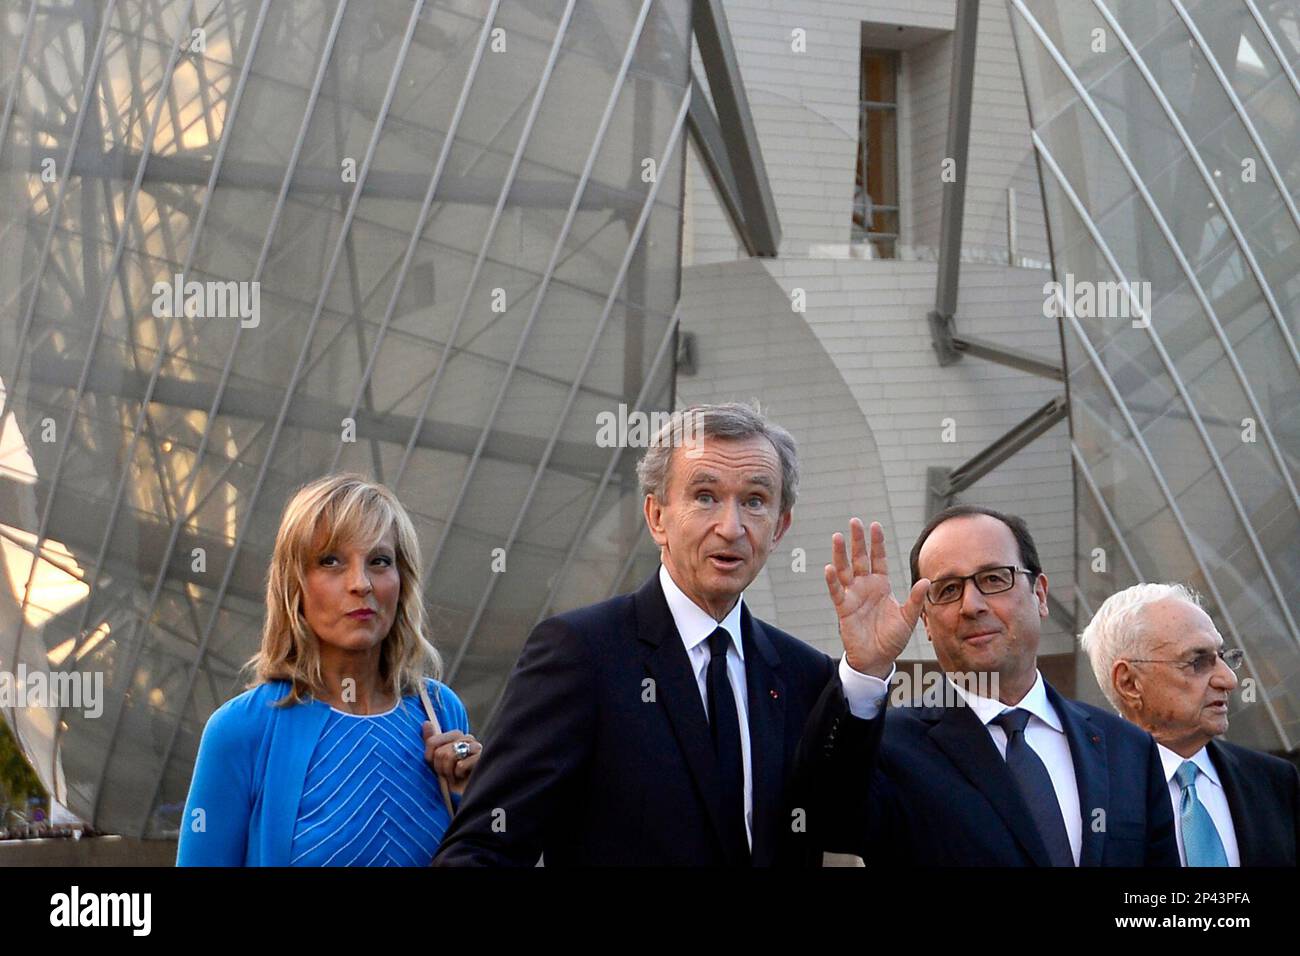 Paris, France April 20, 2023 - LVMH general shareholders meeting.The global  luxury giant, which